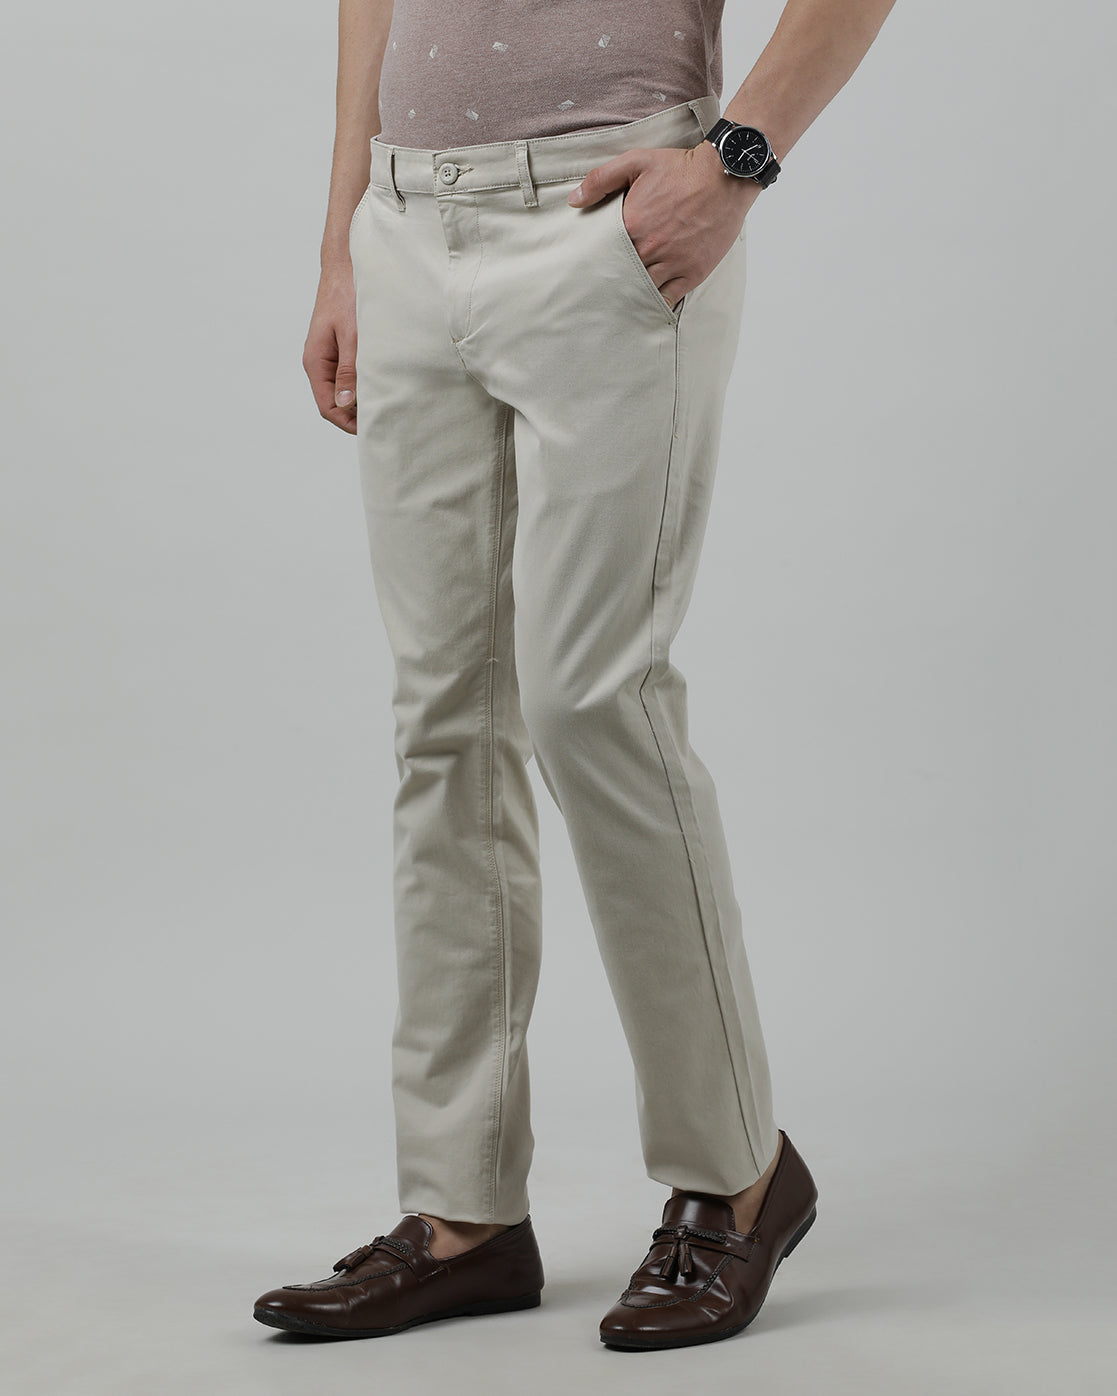 Crocodile Casual Slim Fit Solid Beige Trousers for Men